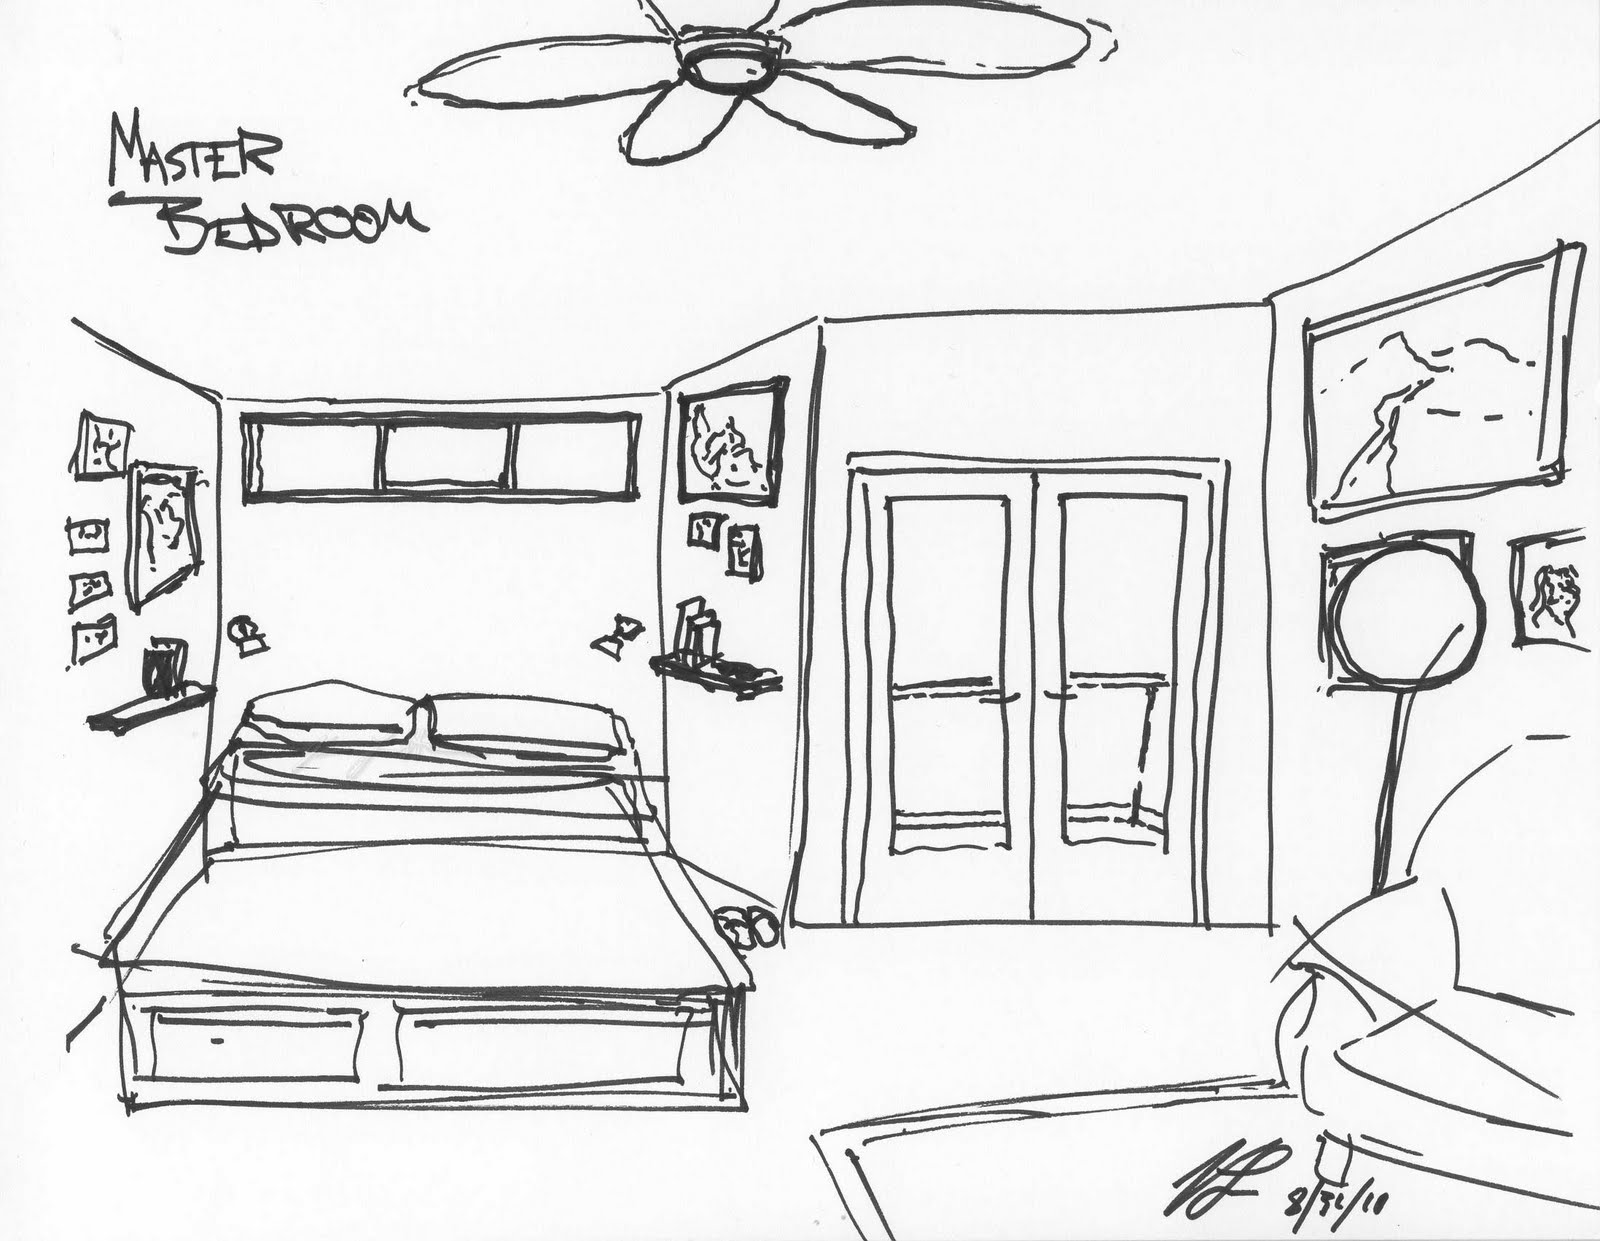 ... Fascinations: Sketch-a-day: Bridge, bedroom, Falling Water and such